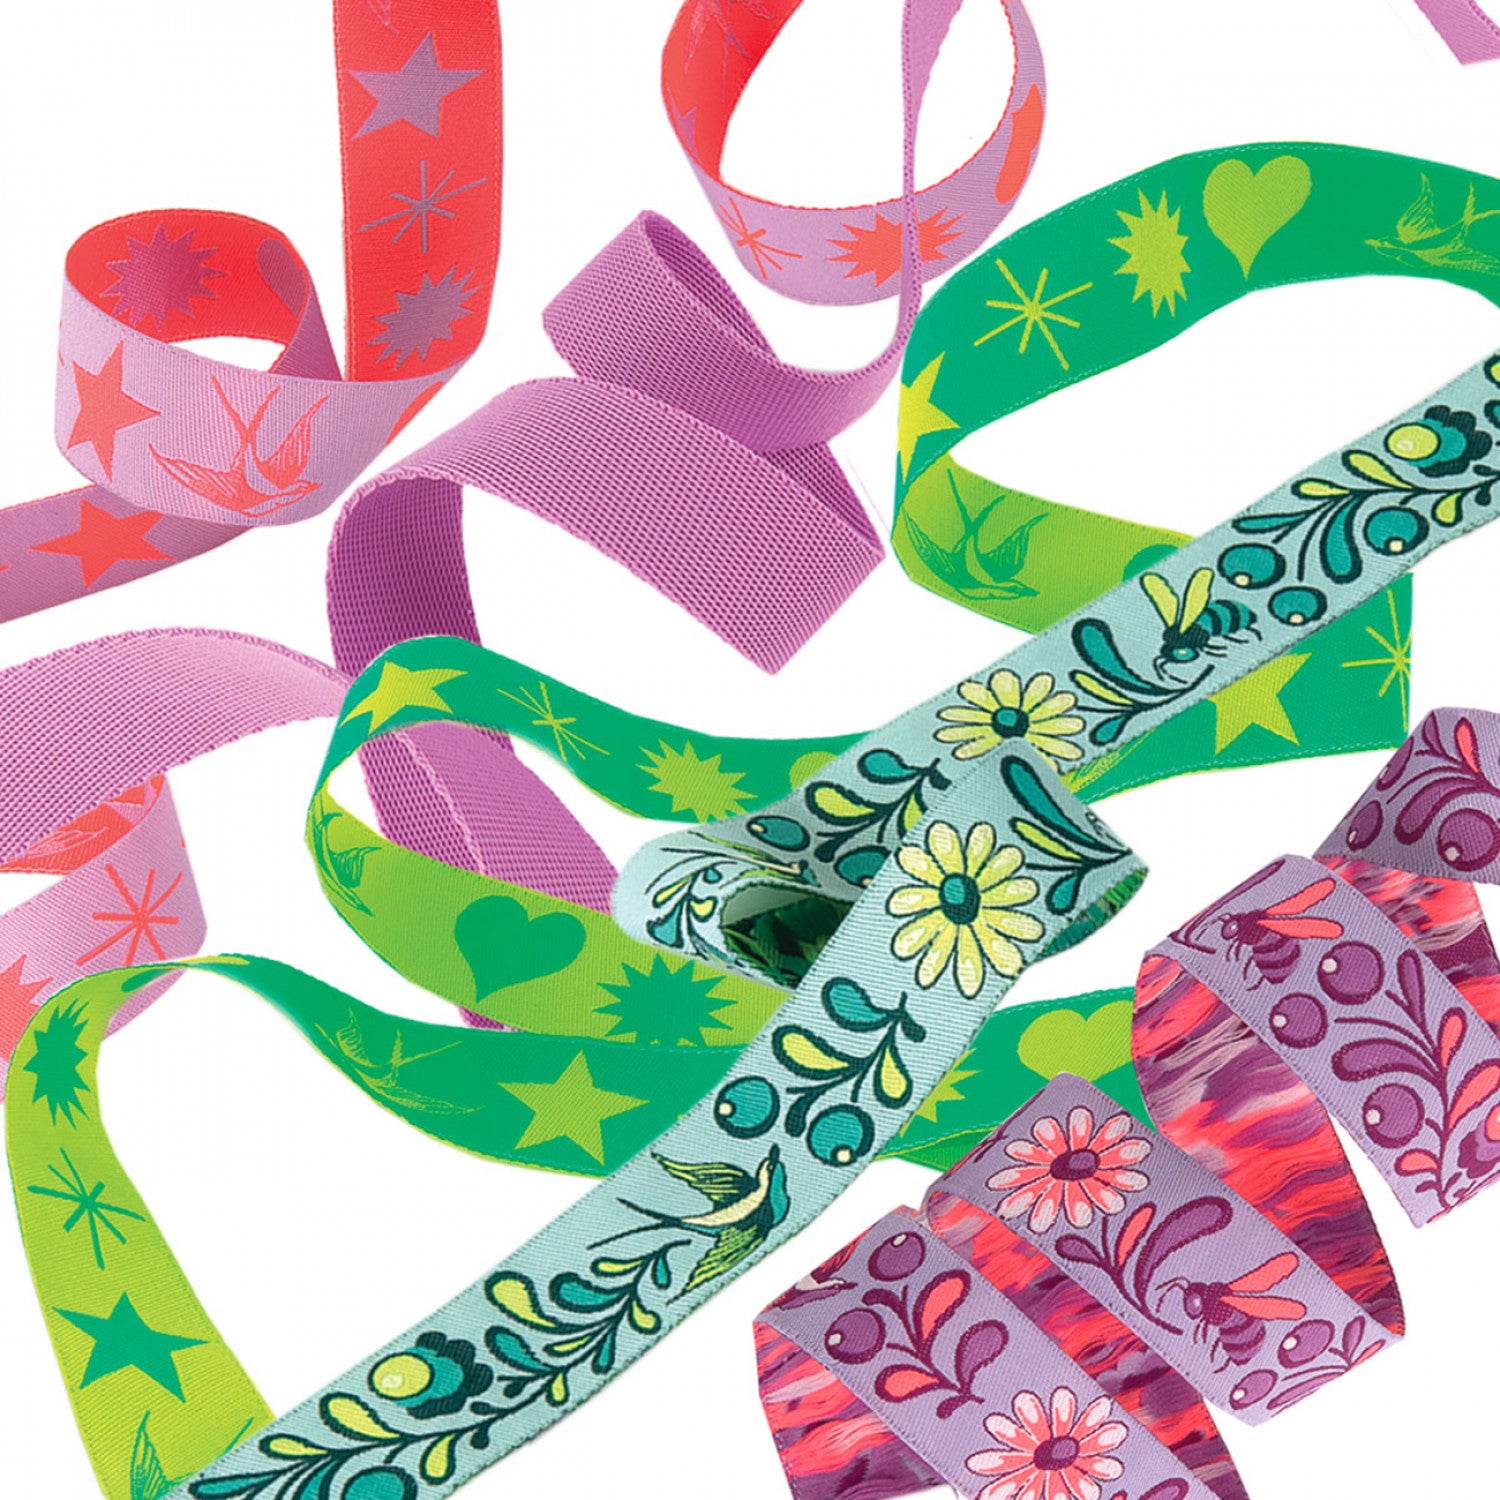 Brand new from Tula Pink, we want to introduce the newest Designer Pack - Fairy Flakes in Mystic! This pack includes 5 coordinated EverGlow webbing and ribbon prints - 2 yard ribbon cuts and 1 yard of webbing - to create a perfectly coordinated set!  